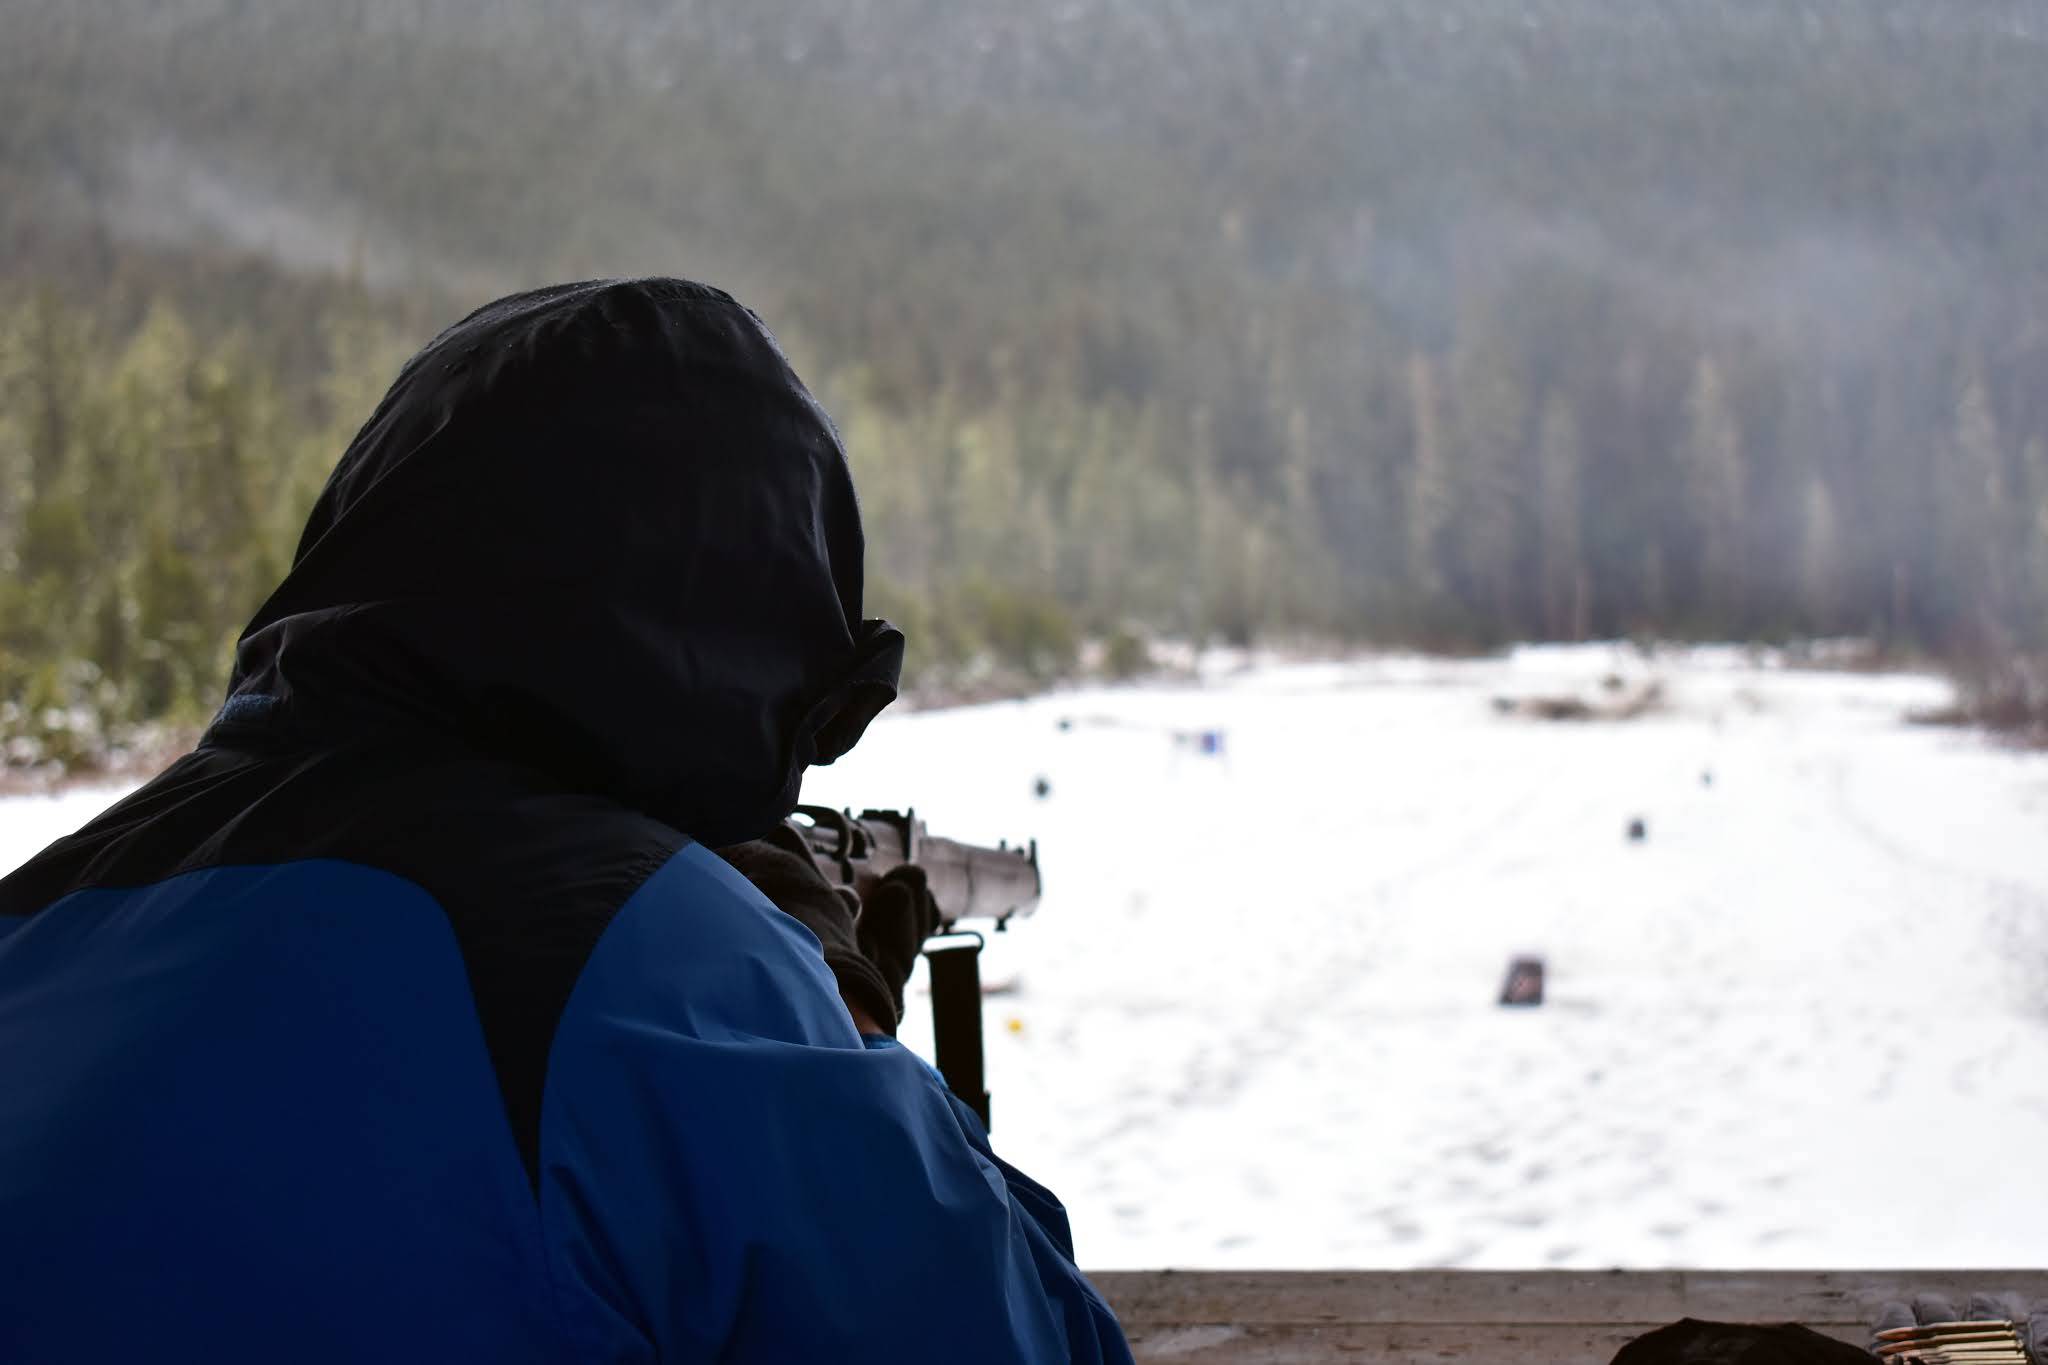 Nolin Ainsworth sights down an Ishapore 2A1 rifle at the Hank Harmon Rifle Range, Dec. 1, 2019. The range will be closed Monday and Tuesday as the brush around the perimeter is cleared by the COVID-19 Conservation Corps. (Peter Segall | Juneau Empire)